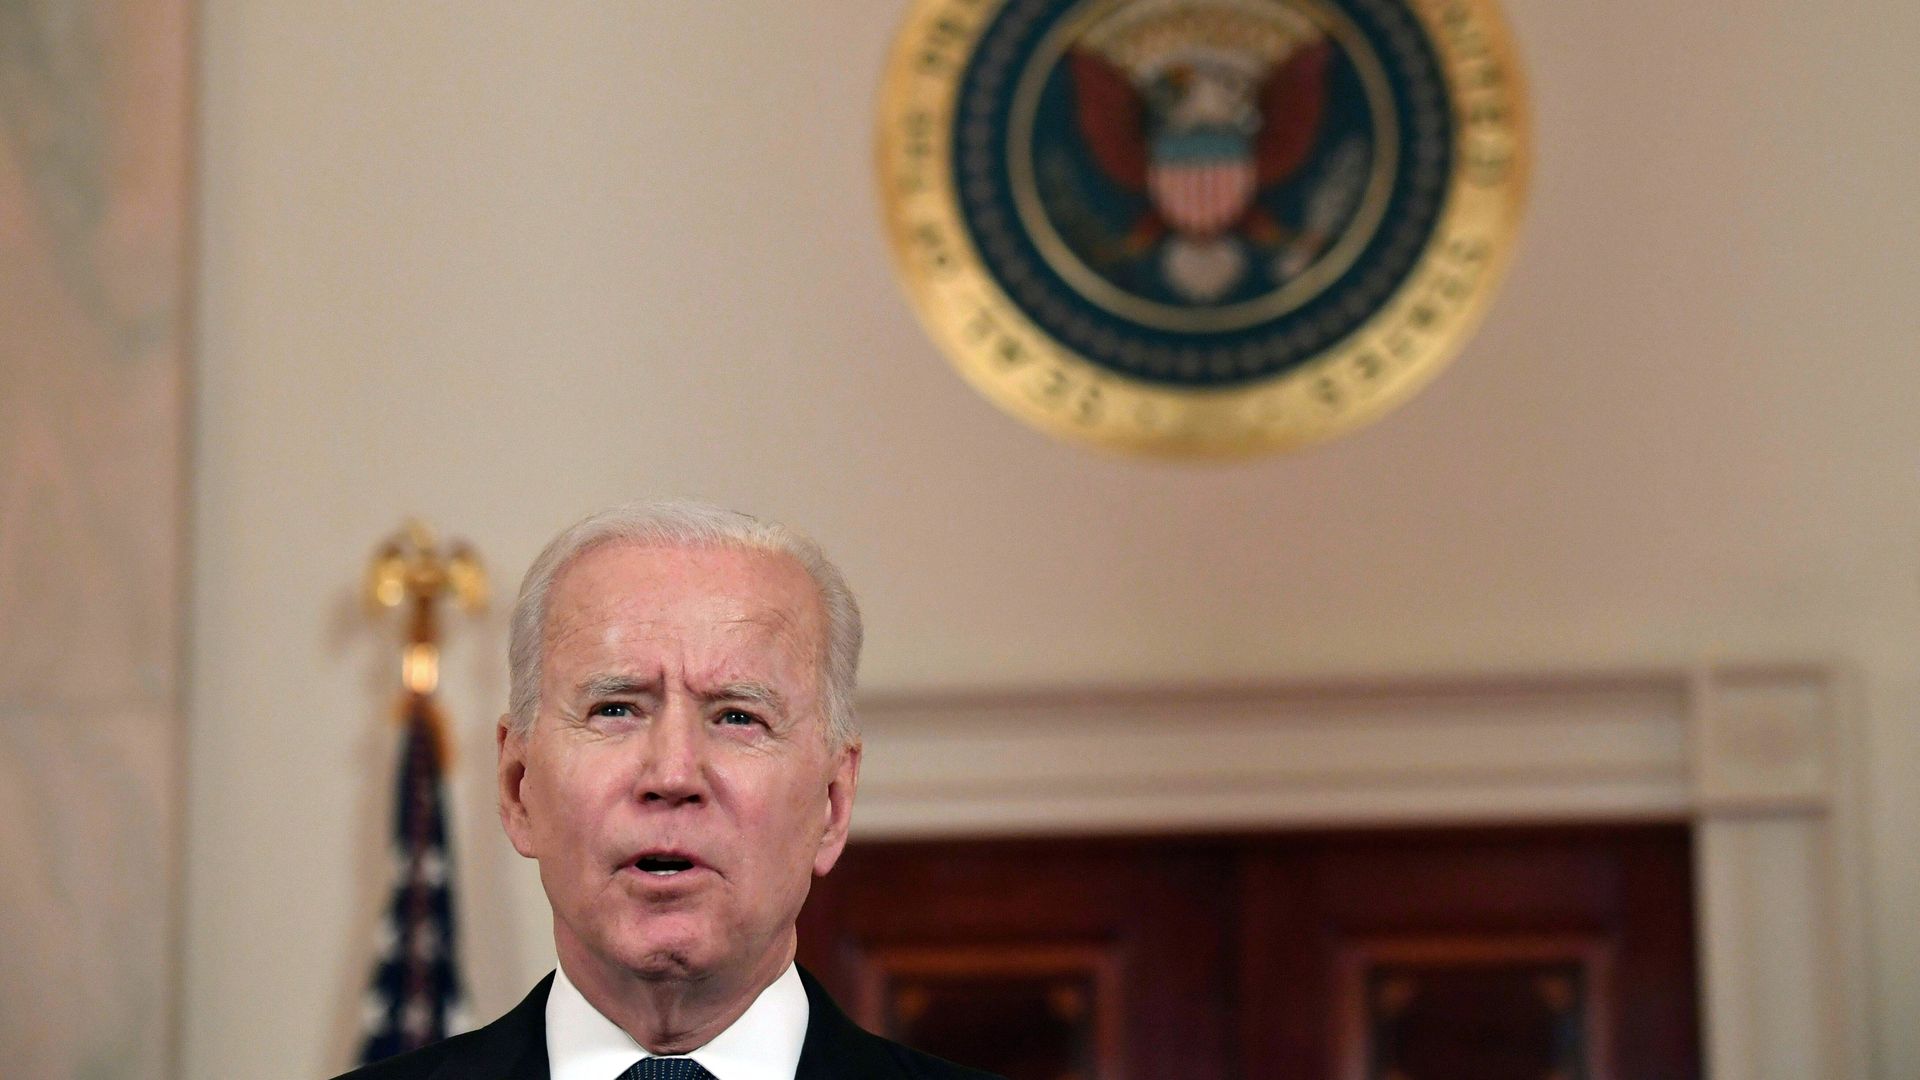 President Biden is seen delivering remarks about a cease-fire in the Israeli-Palestinian fighting.